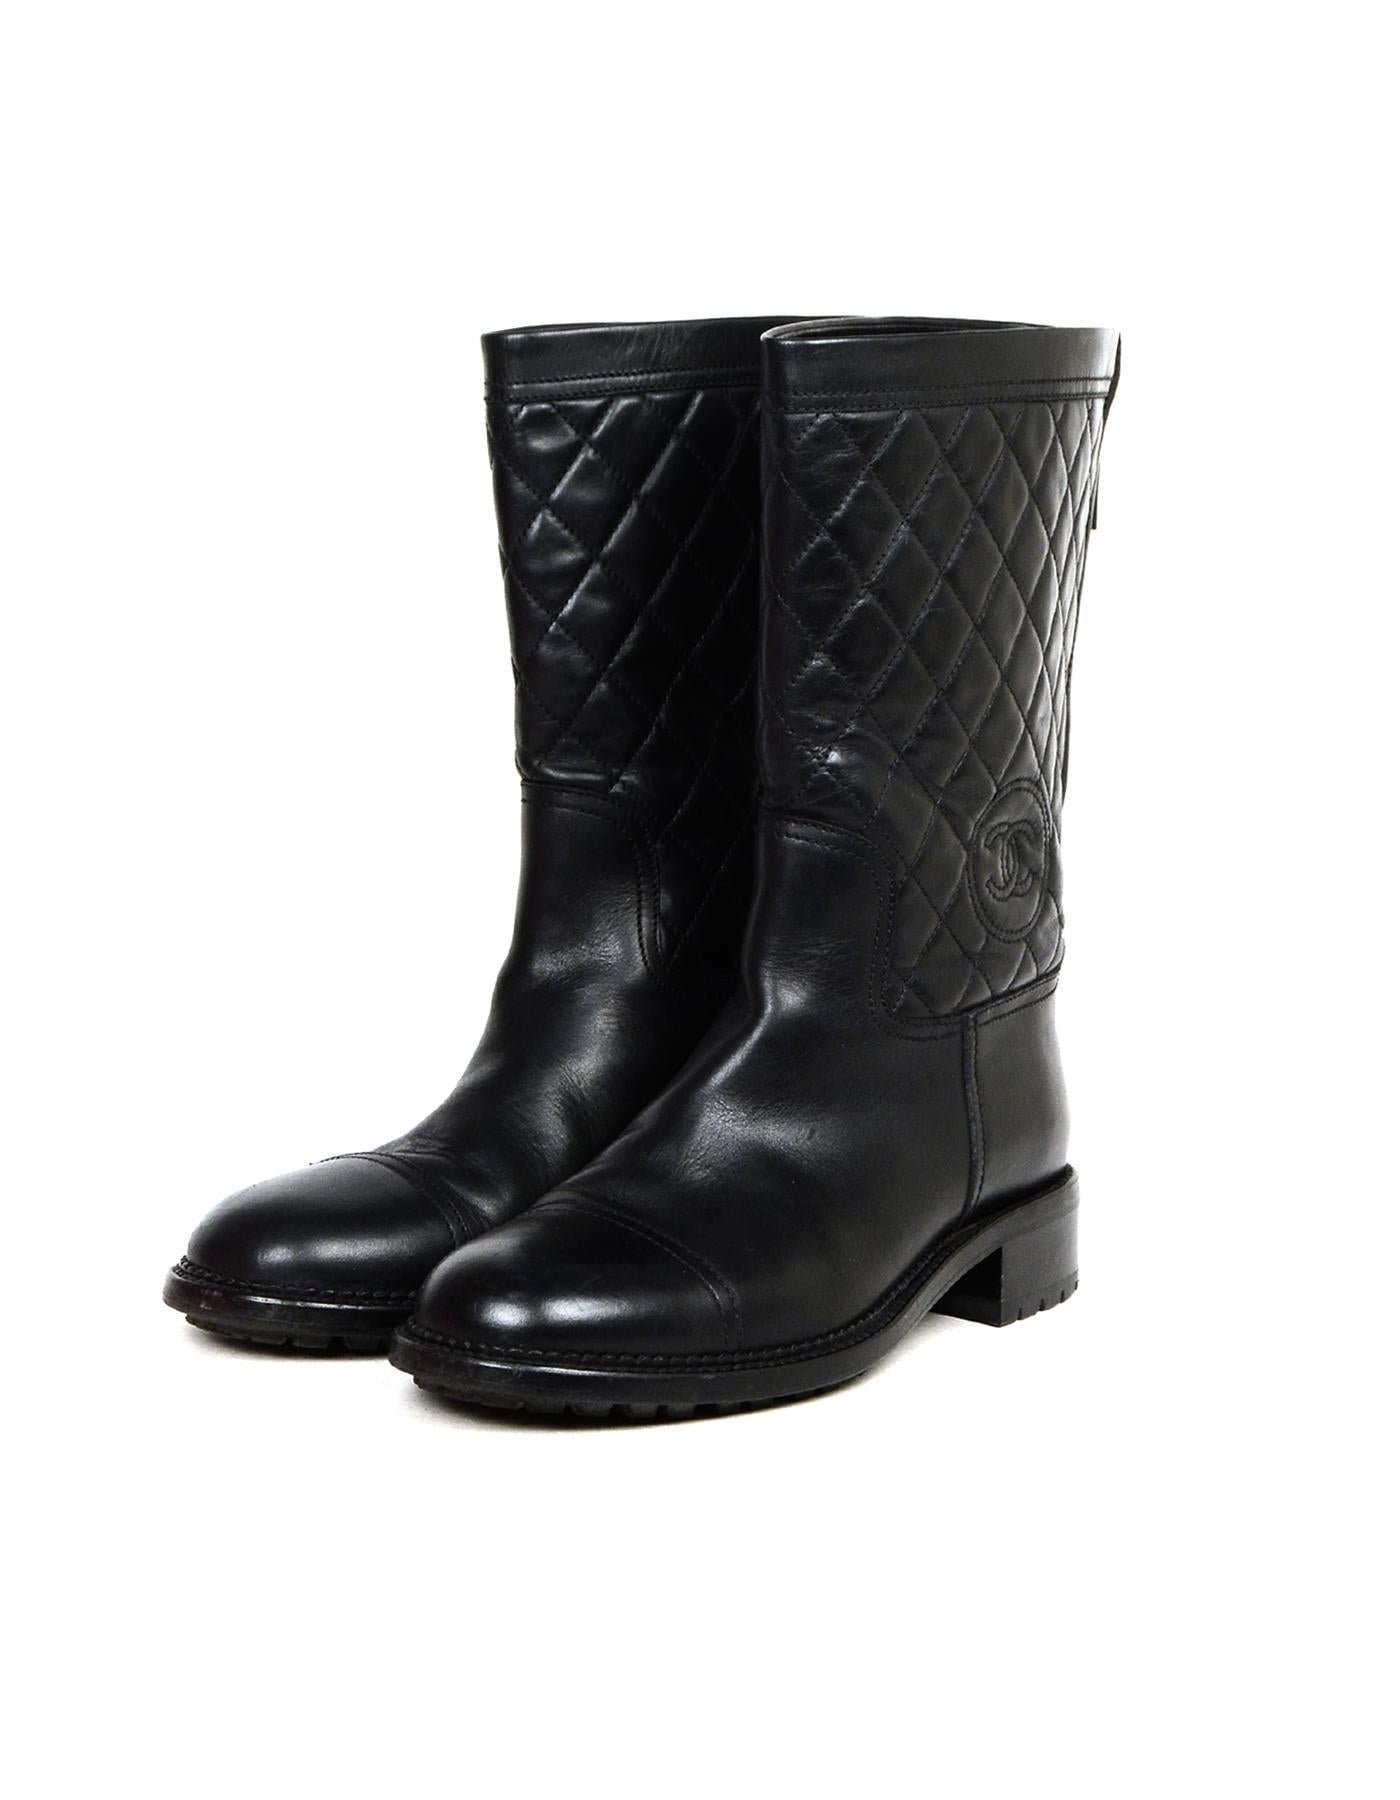 Chanel Black Leather Quilted CC Biker Boots Sz 40

Made In: Italy
Color: Black
Hardware: Black
Materials: Leather, metal
Closure/Opening:  Zipper back
Overall Condition: Very good pre-owned condition with exception of scratch at front toe of right